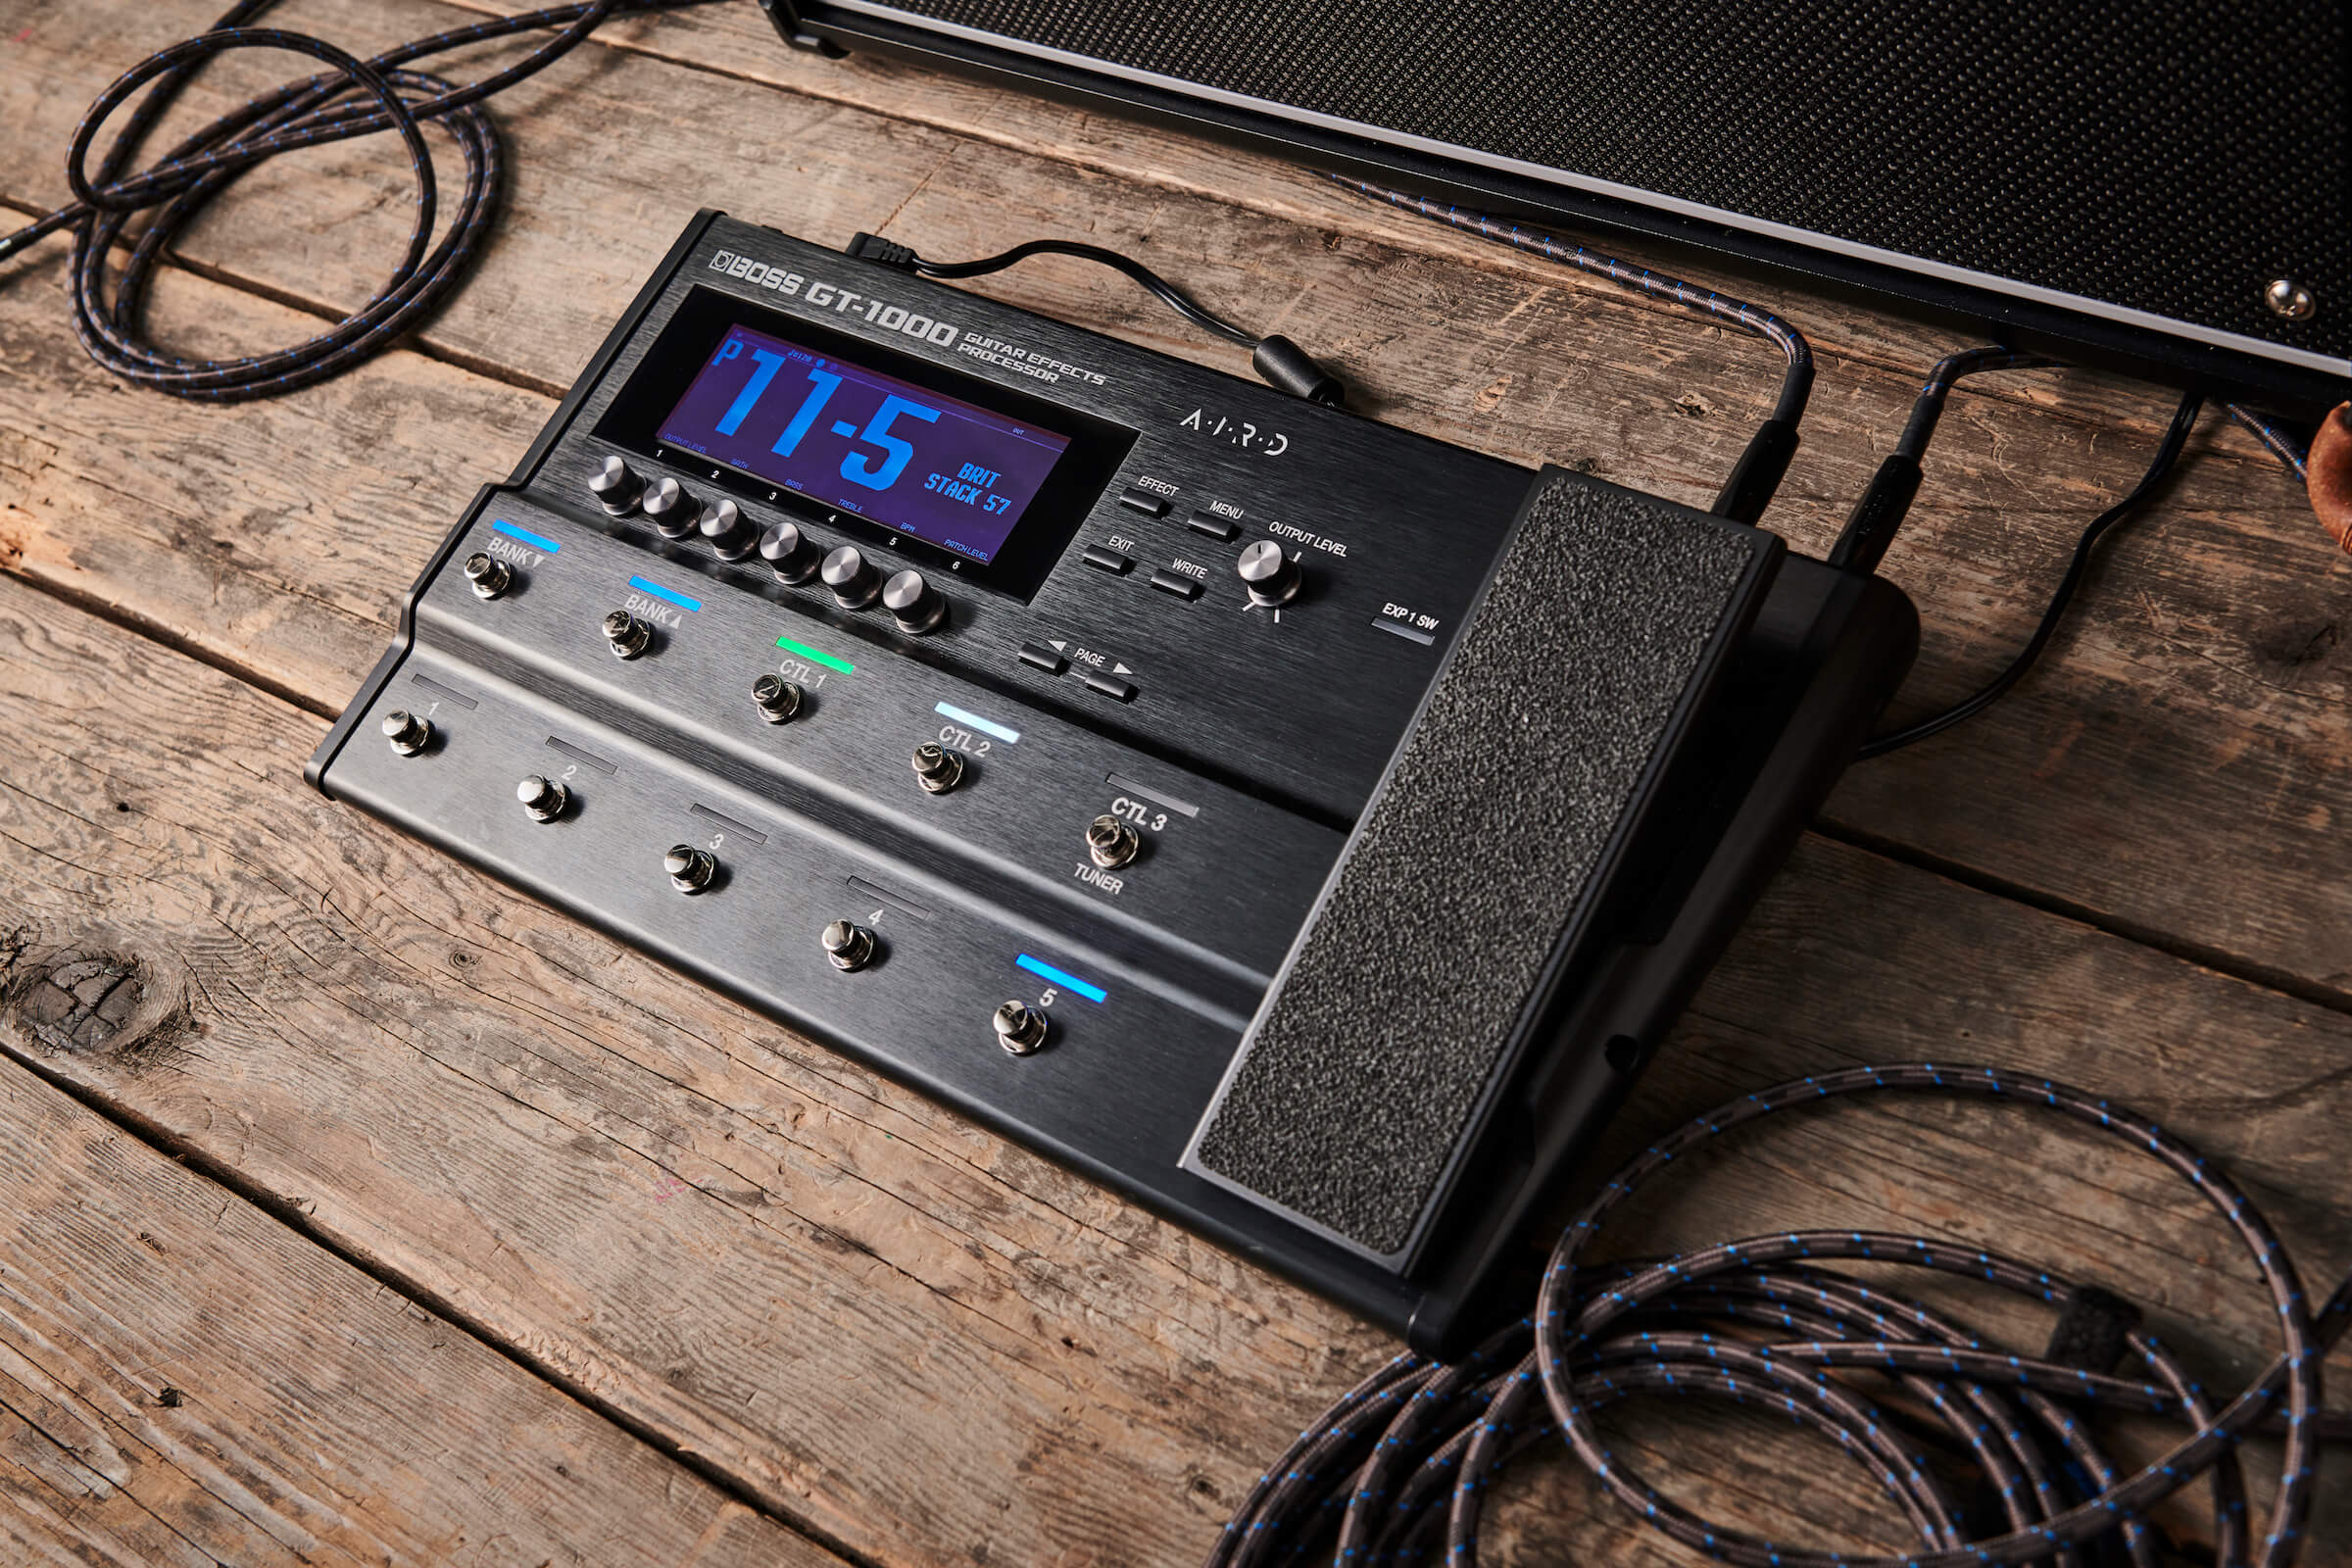 BOSS GT-1000 update adds bass guitar support, new footswitch modes  more